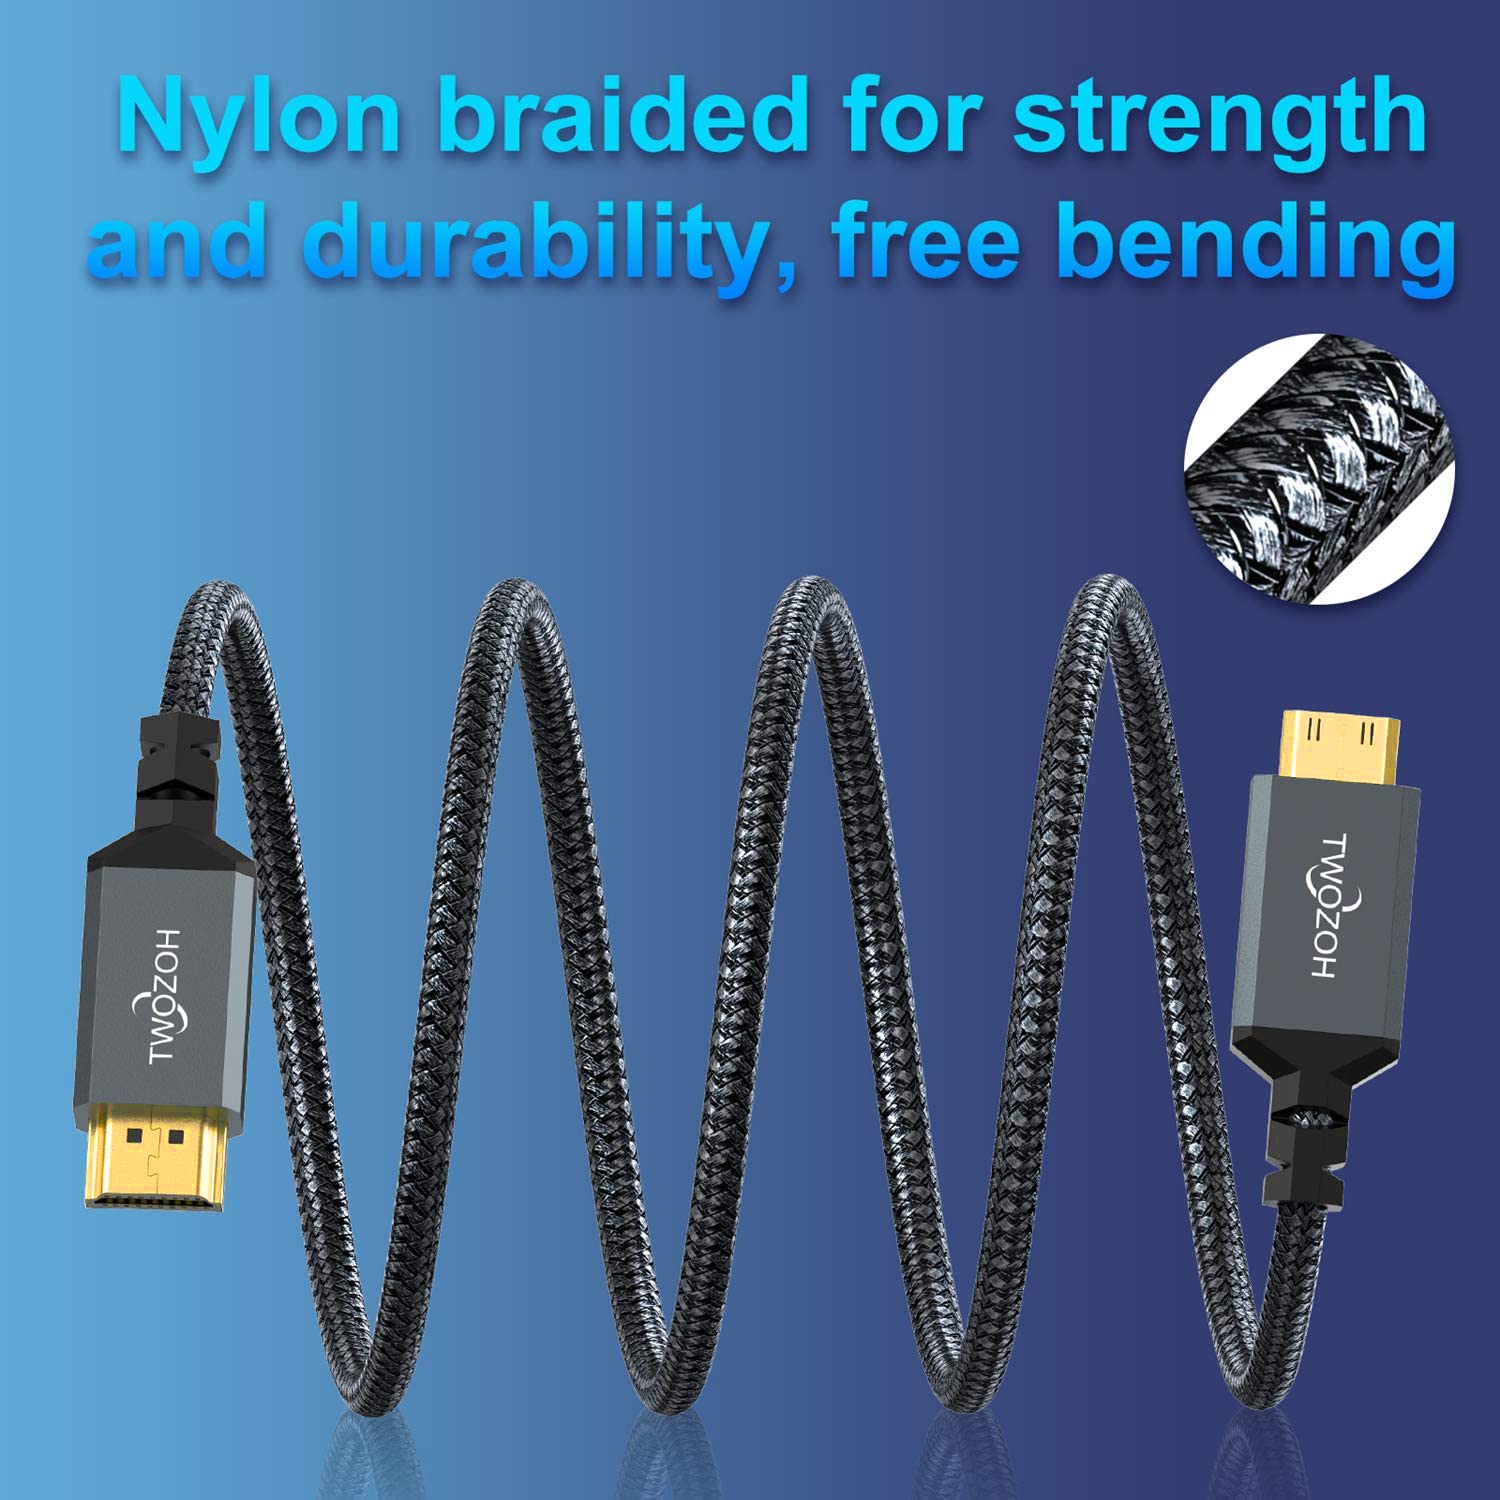 Twozoh Mini HDMI to HDMI Cable 1FT, Short High-Speed HDMI to Mini HDMI Braided Cord Support 3D 4K/60Hz 1080p 720p